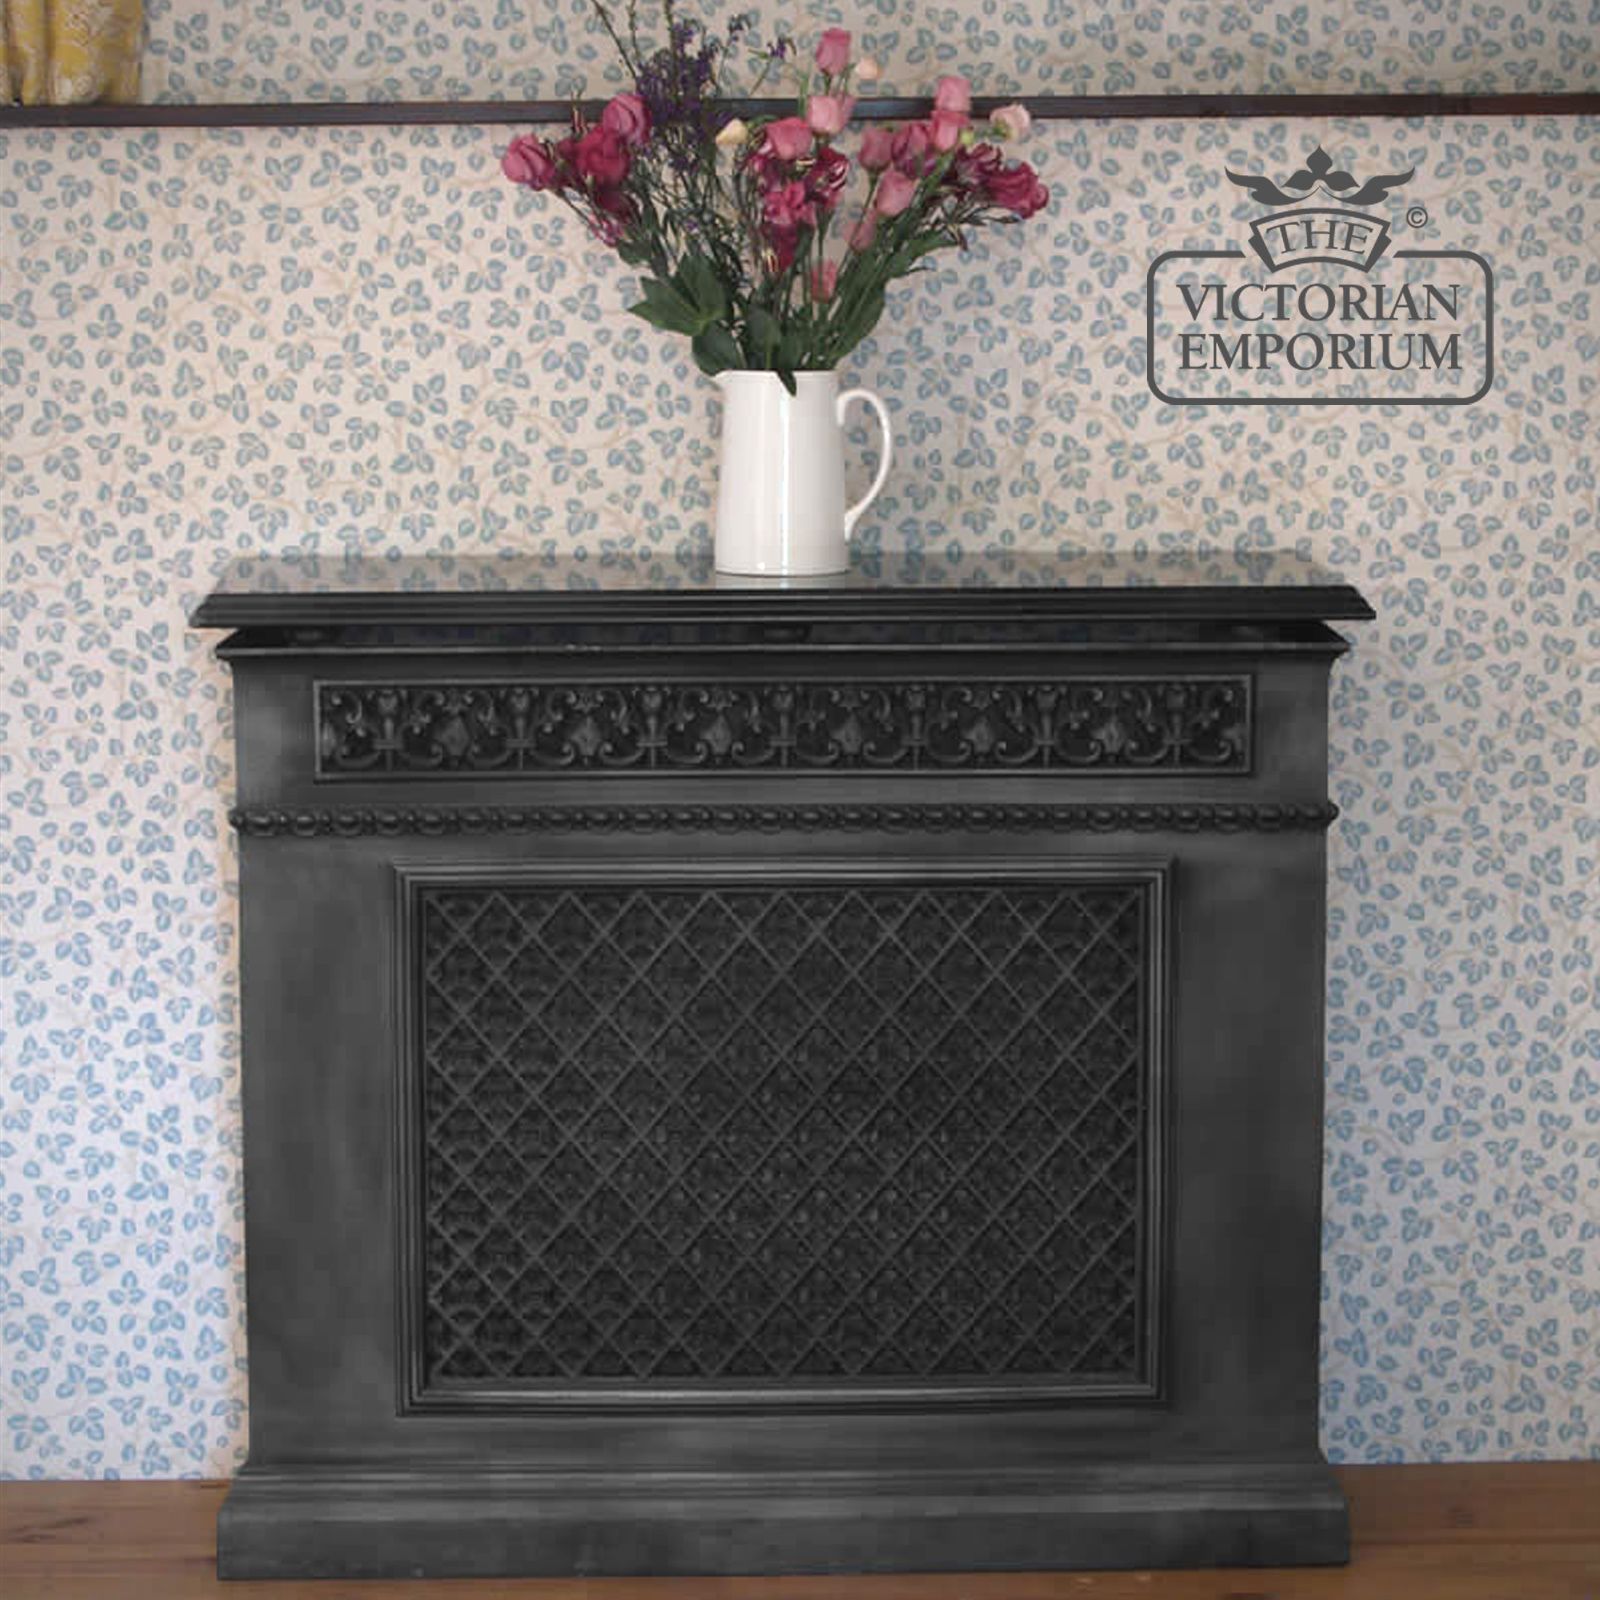 1 panel radiator cover castiron hall insitu granite top traditional victorian 19thcentry old semi decorative rx198 large